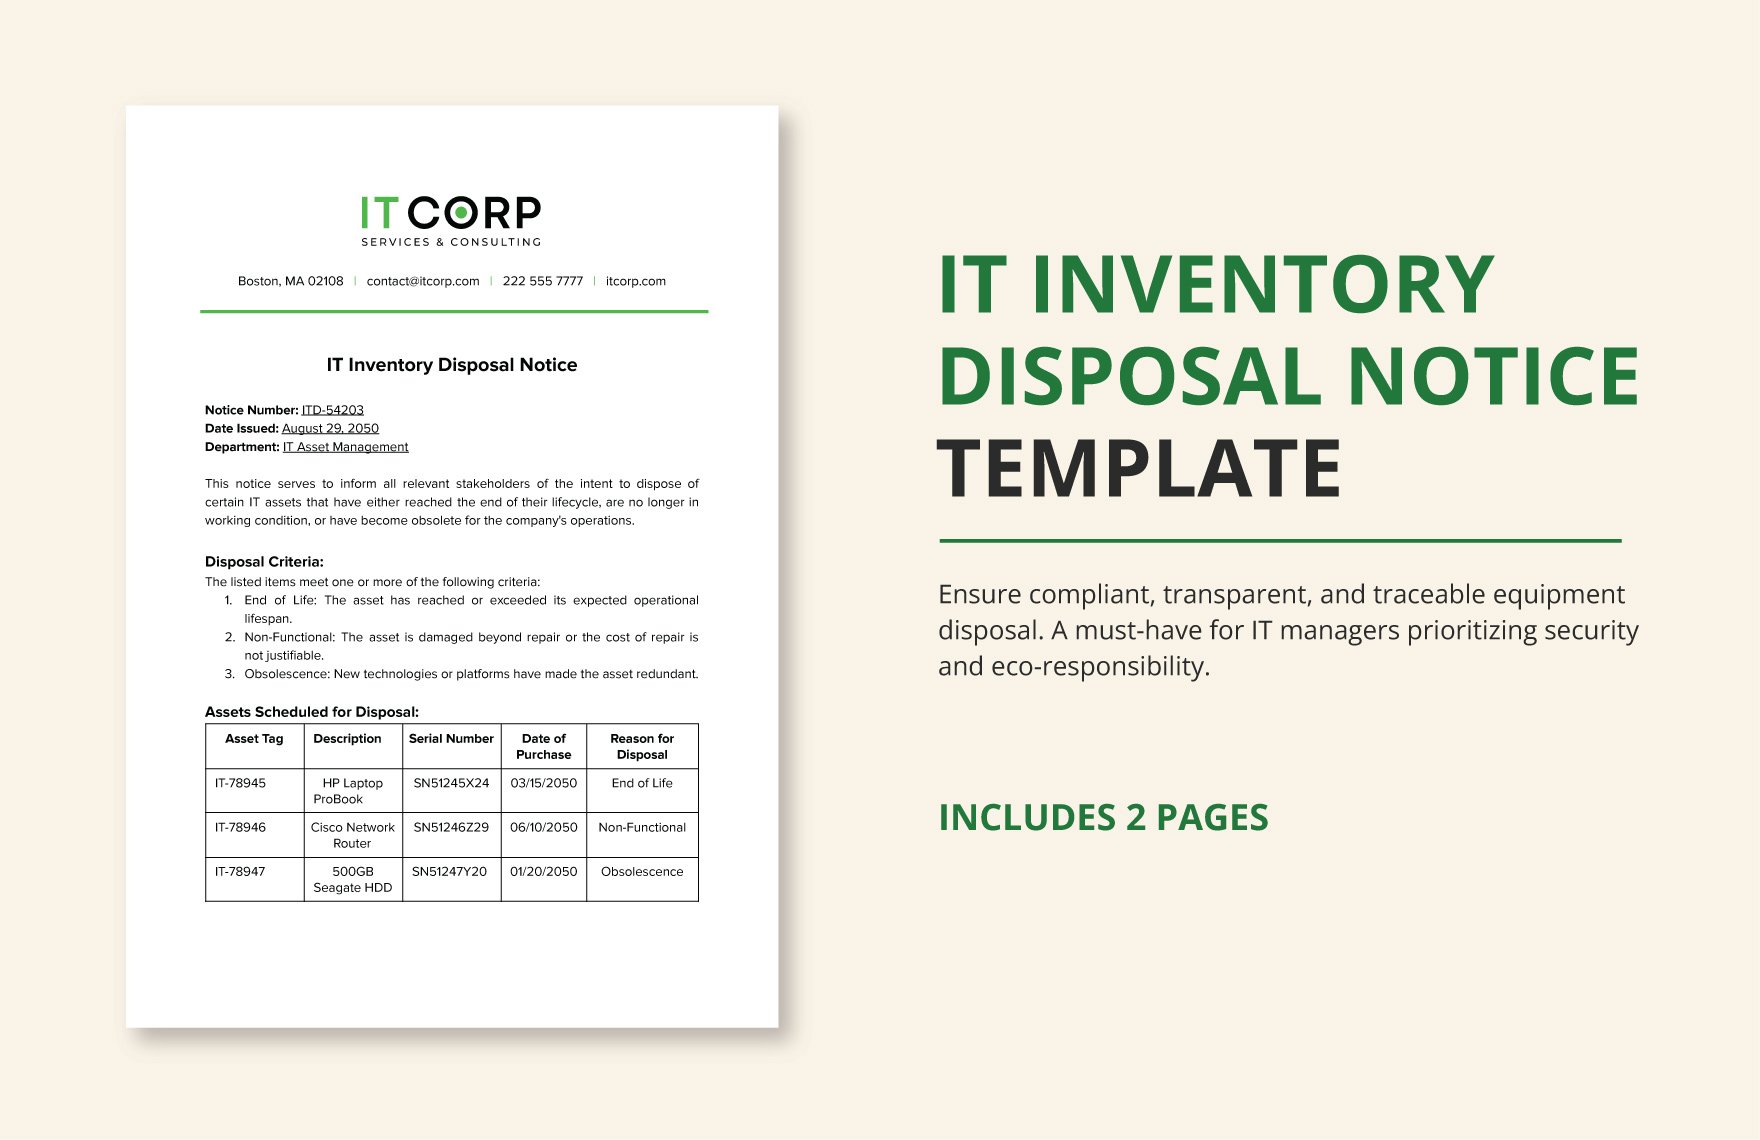 IT Inventory Disposal Notice Template